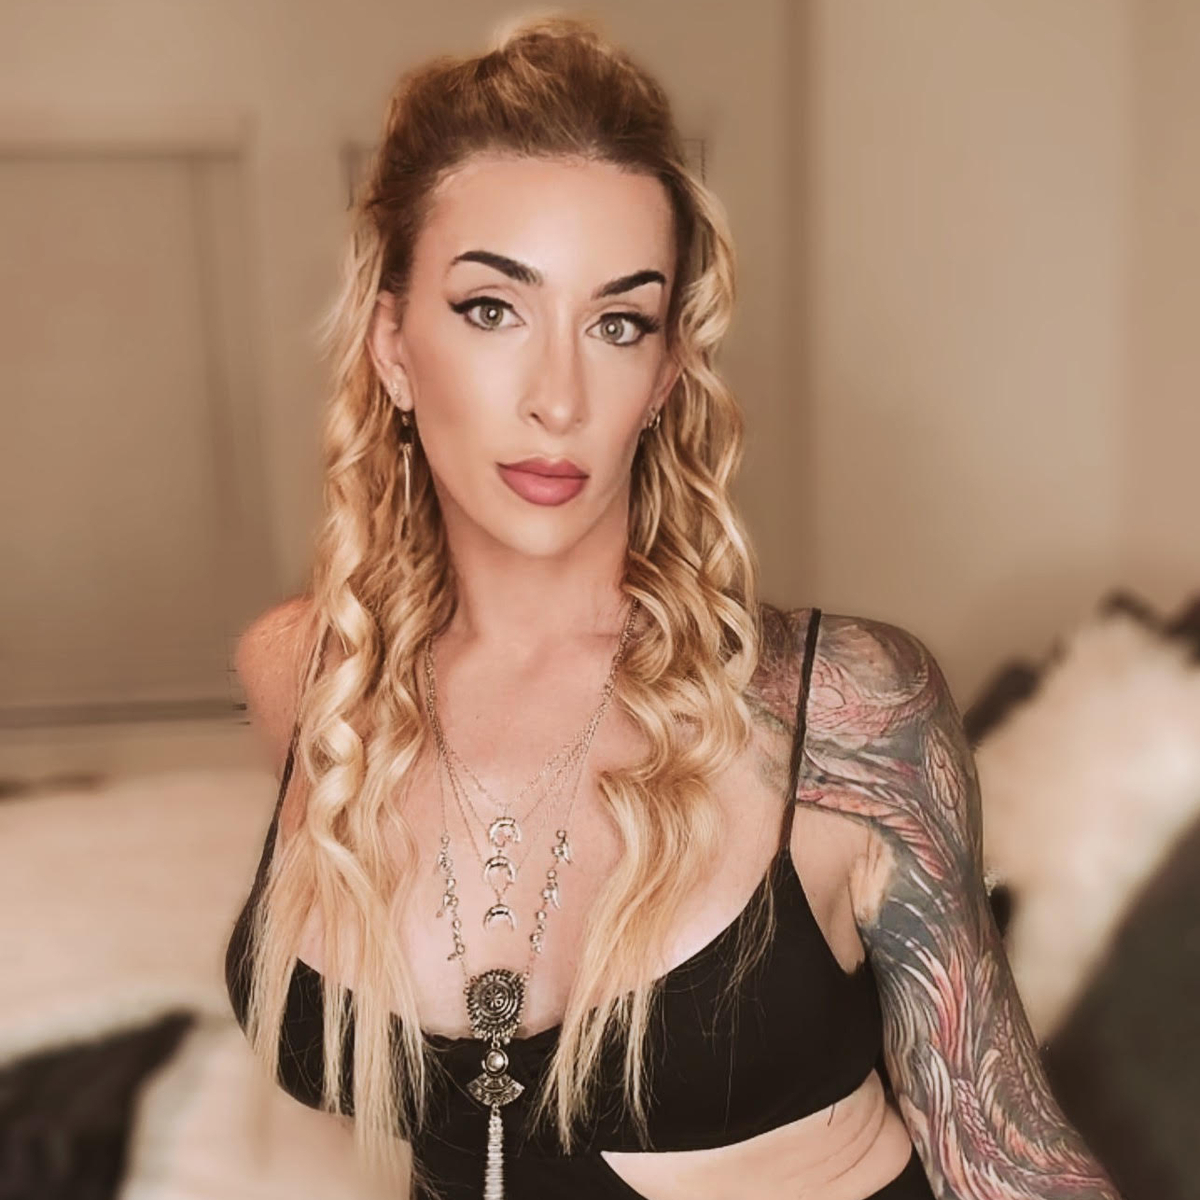 WWE Star Gabbi Tuft Lost All Will to Live—But Coming Out as Transgender Changed Everything